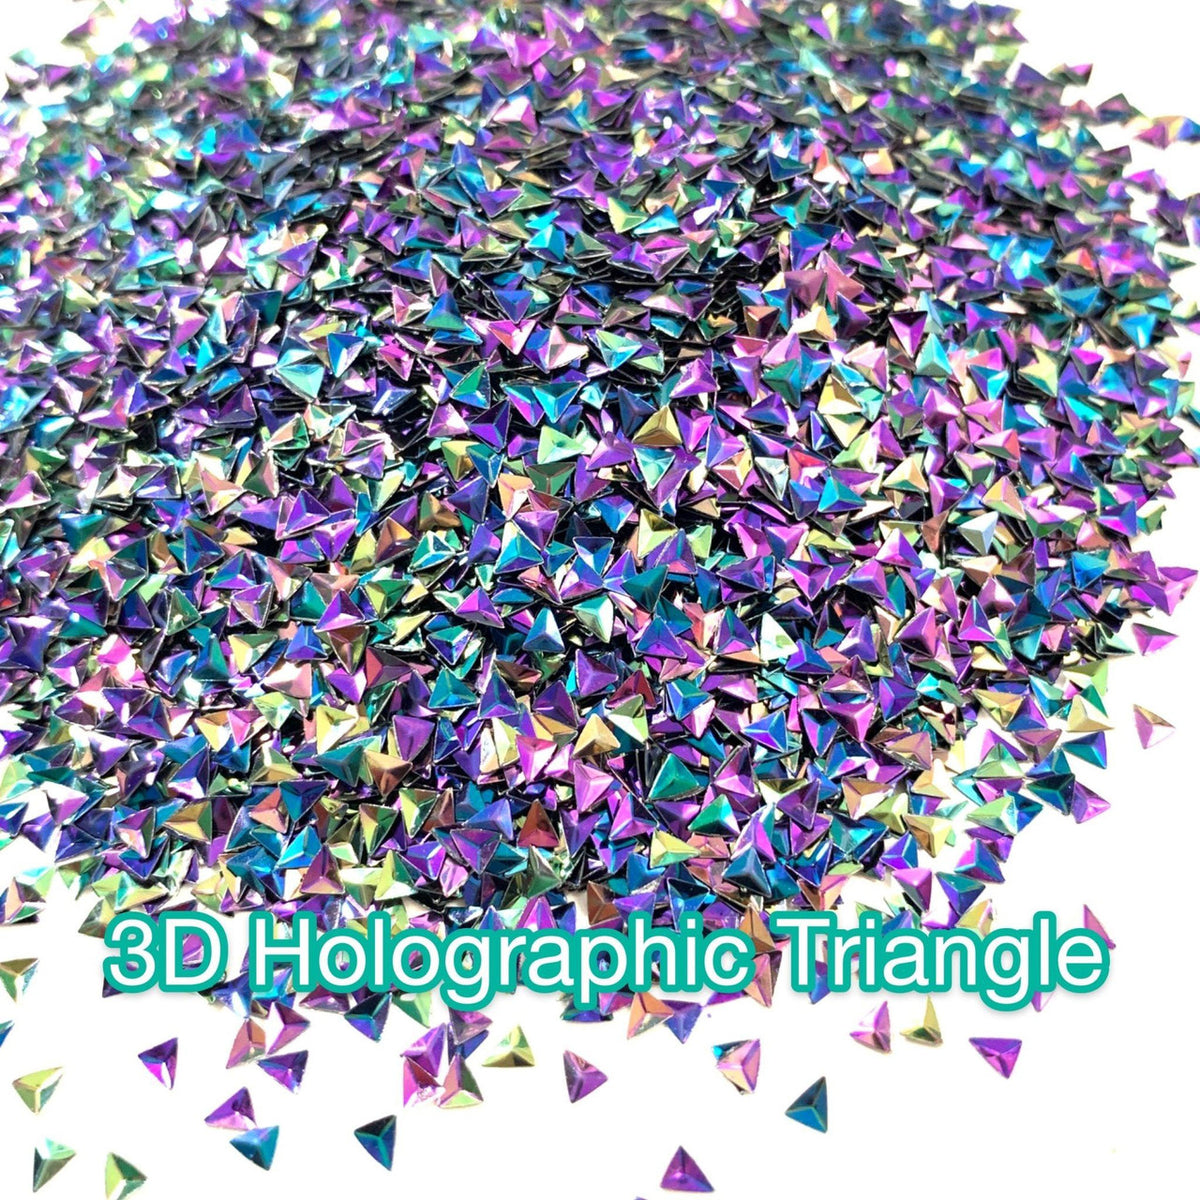 Holographic Glitter Shapes for Epoxy and UV Resin Art - Resin Rockers